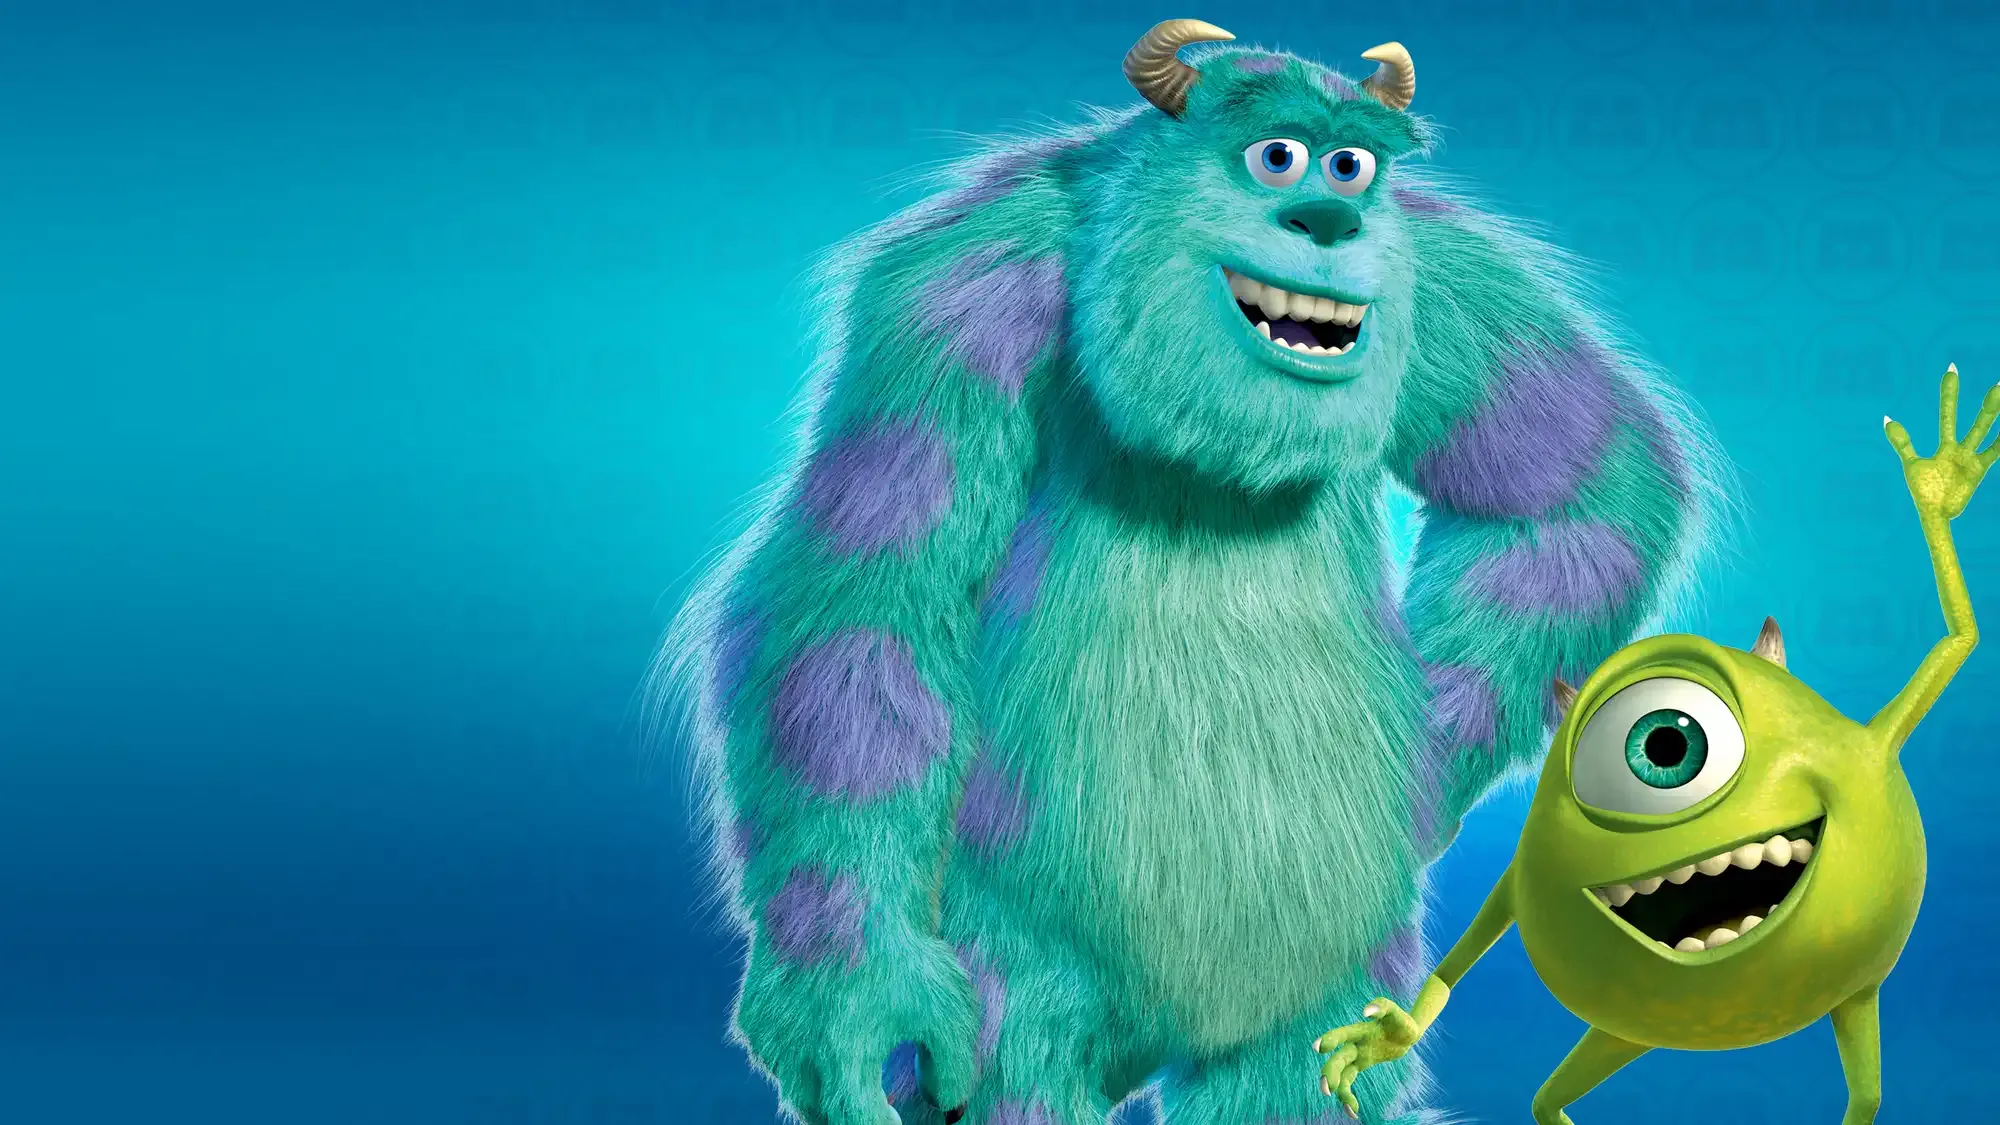 Monsters, Inc. movie review